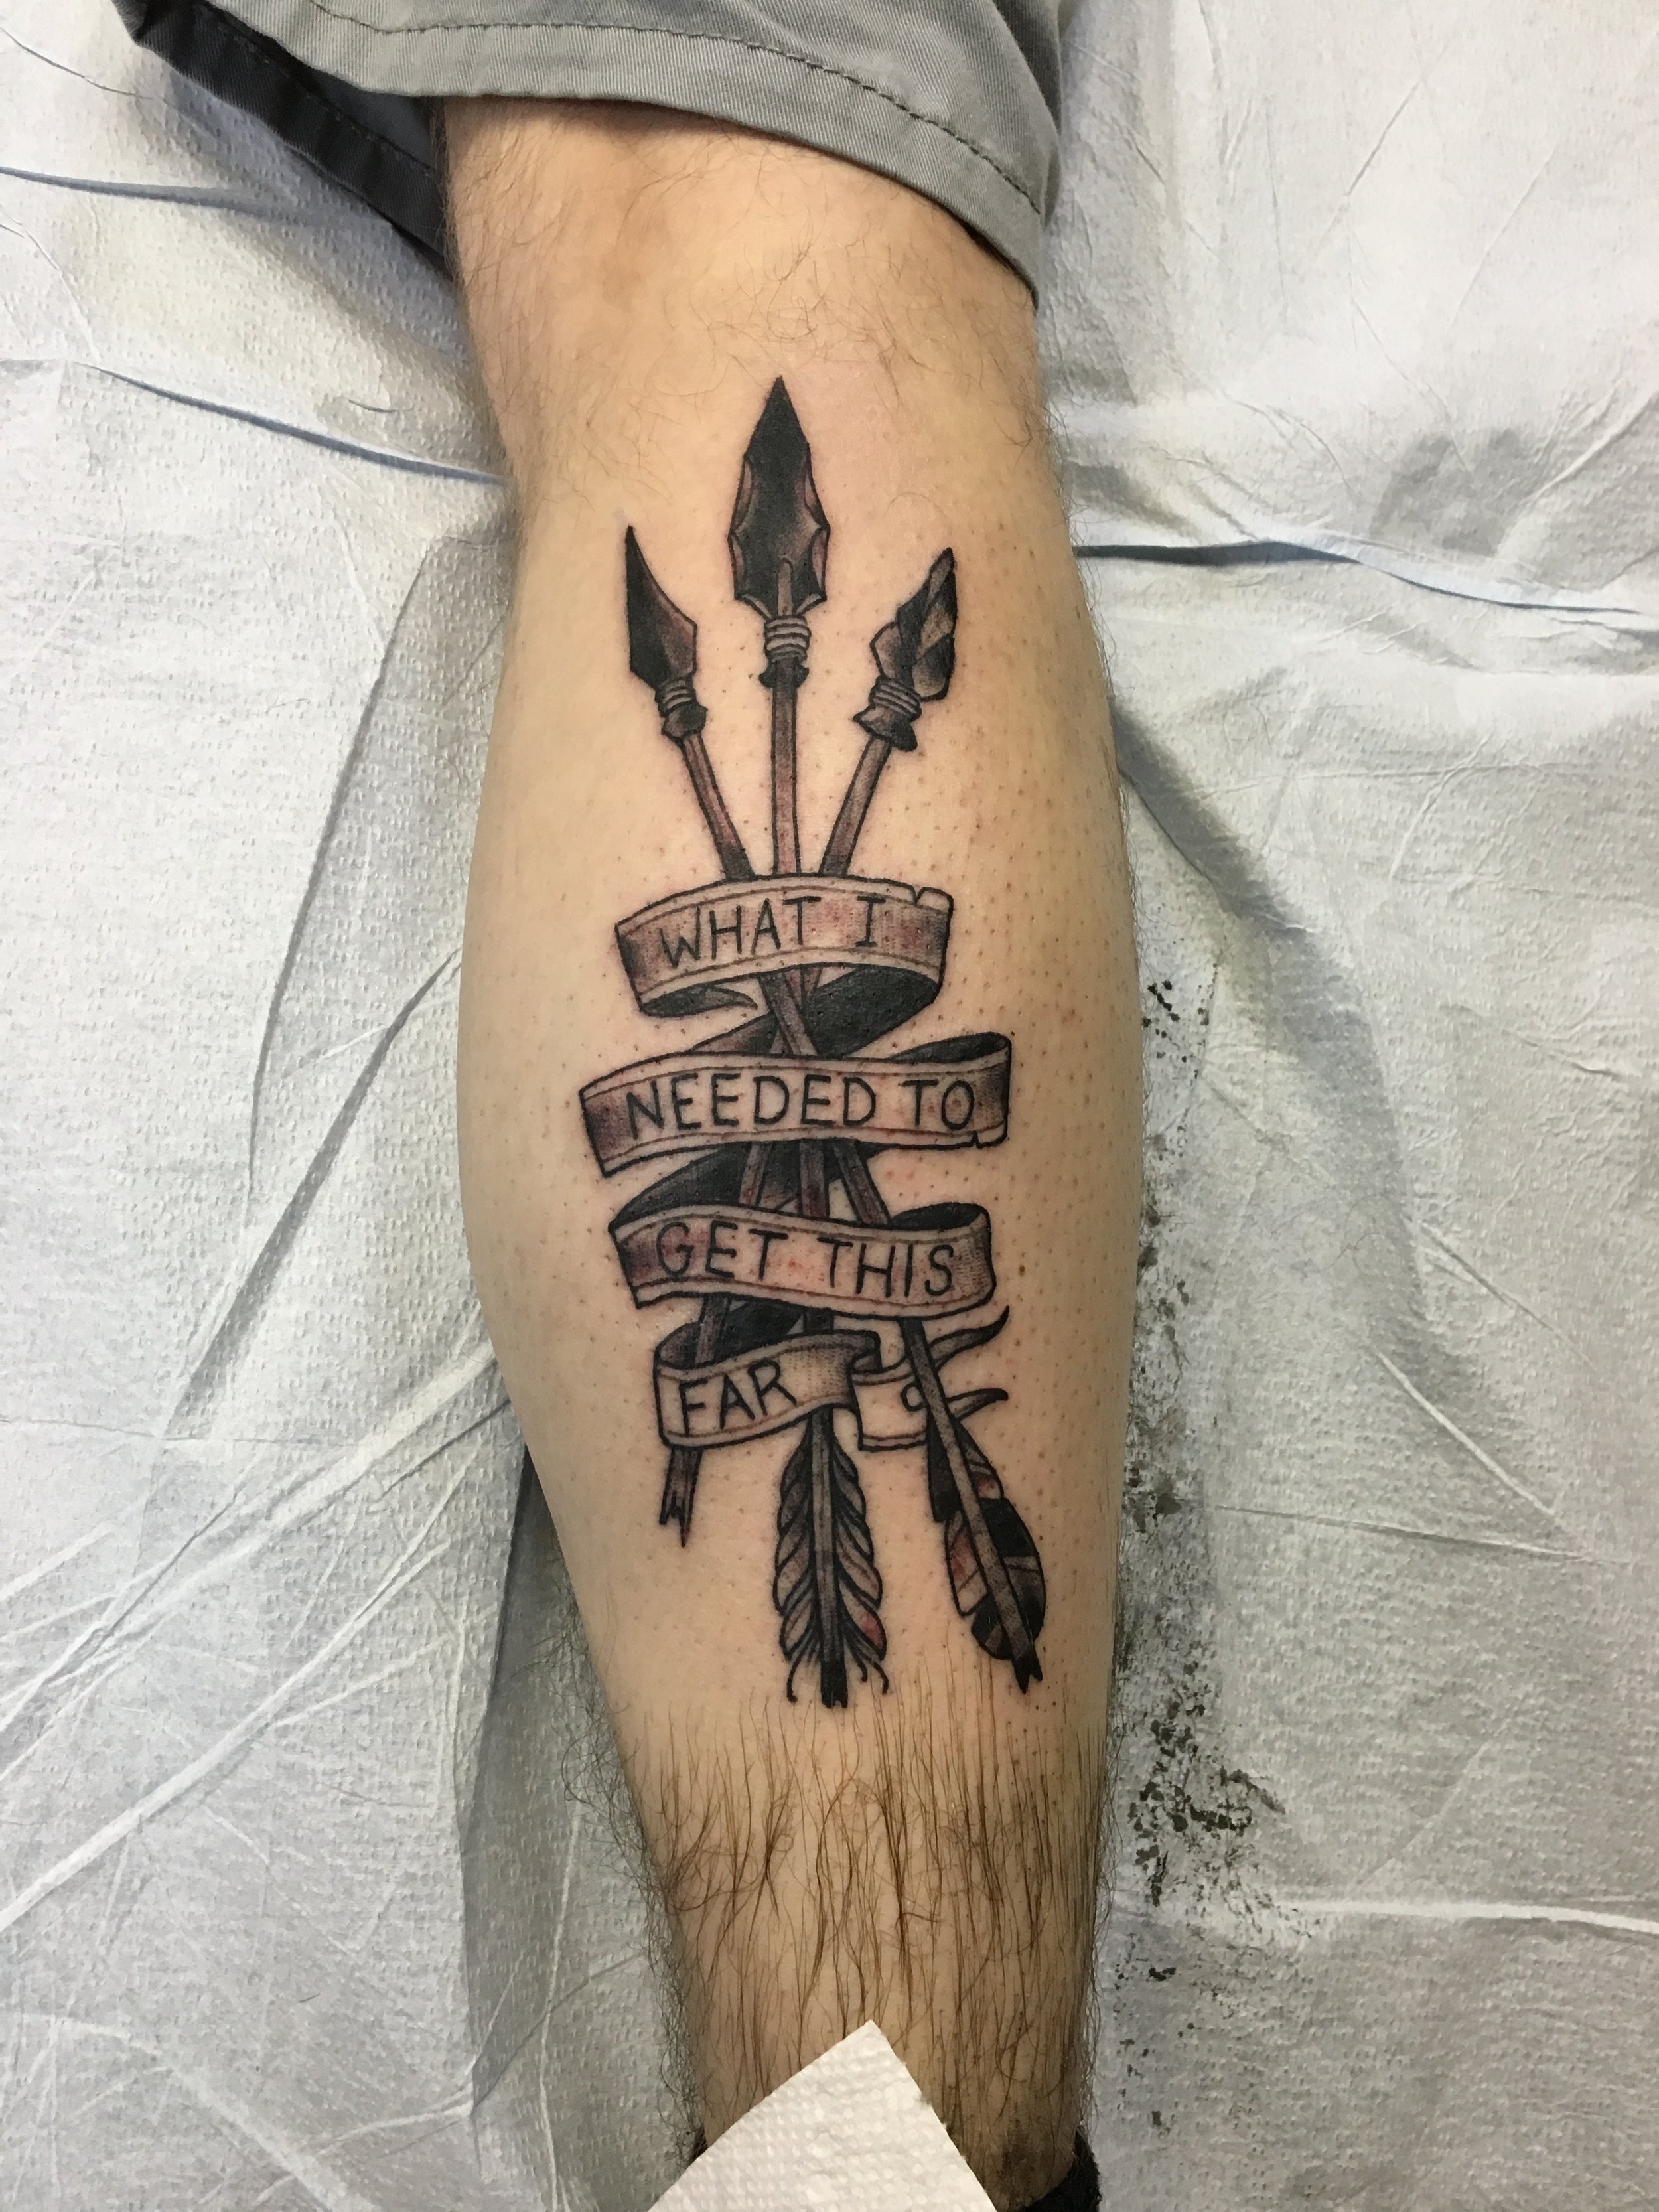 Tattoosday 008: What I Needed to Get this Far — The Art of Survival